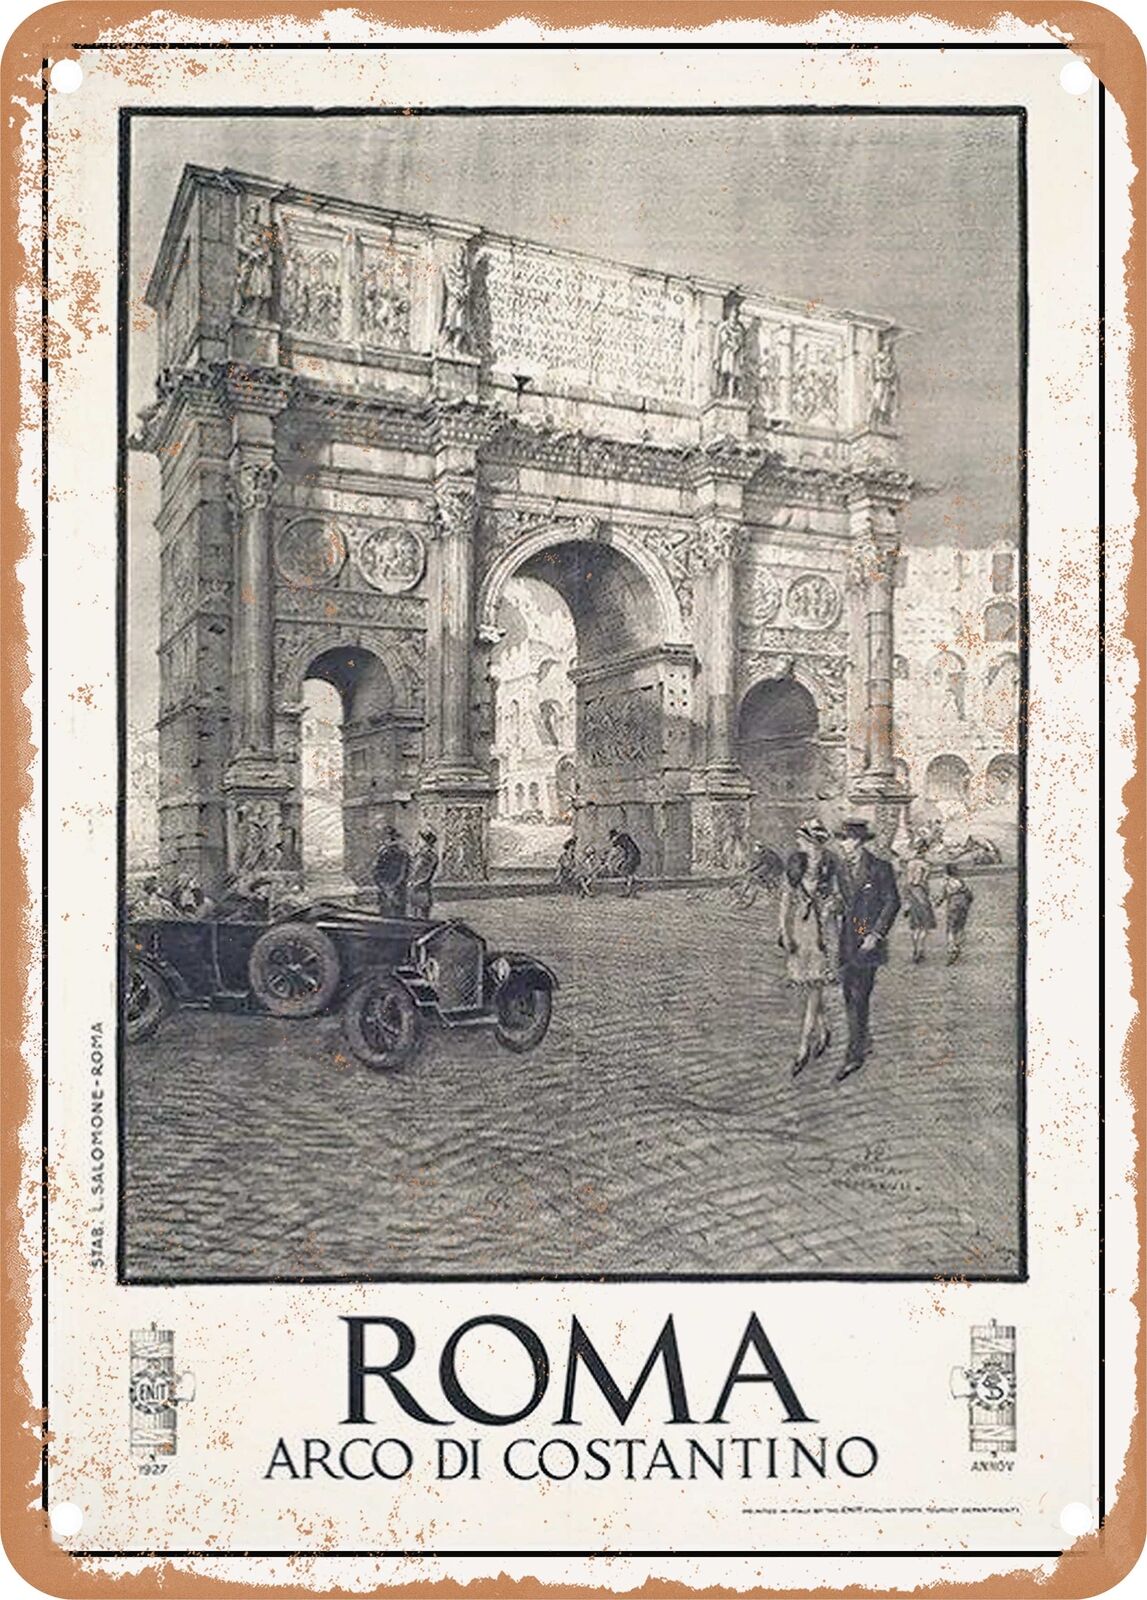 METAL SIGN - 1927 Rome Arch of Constantine Vintage Ad